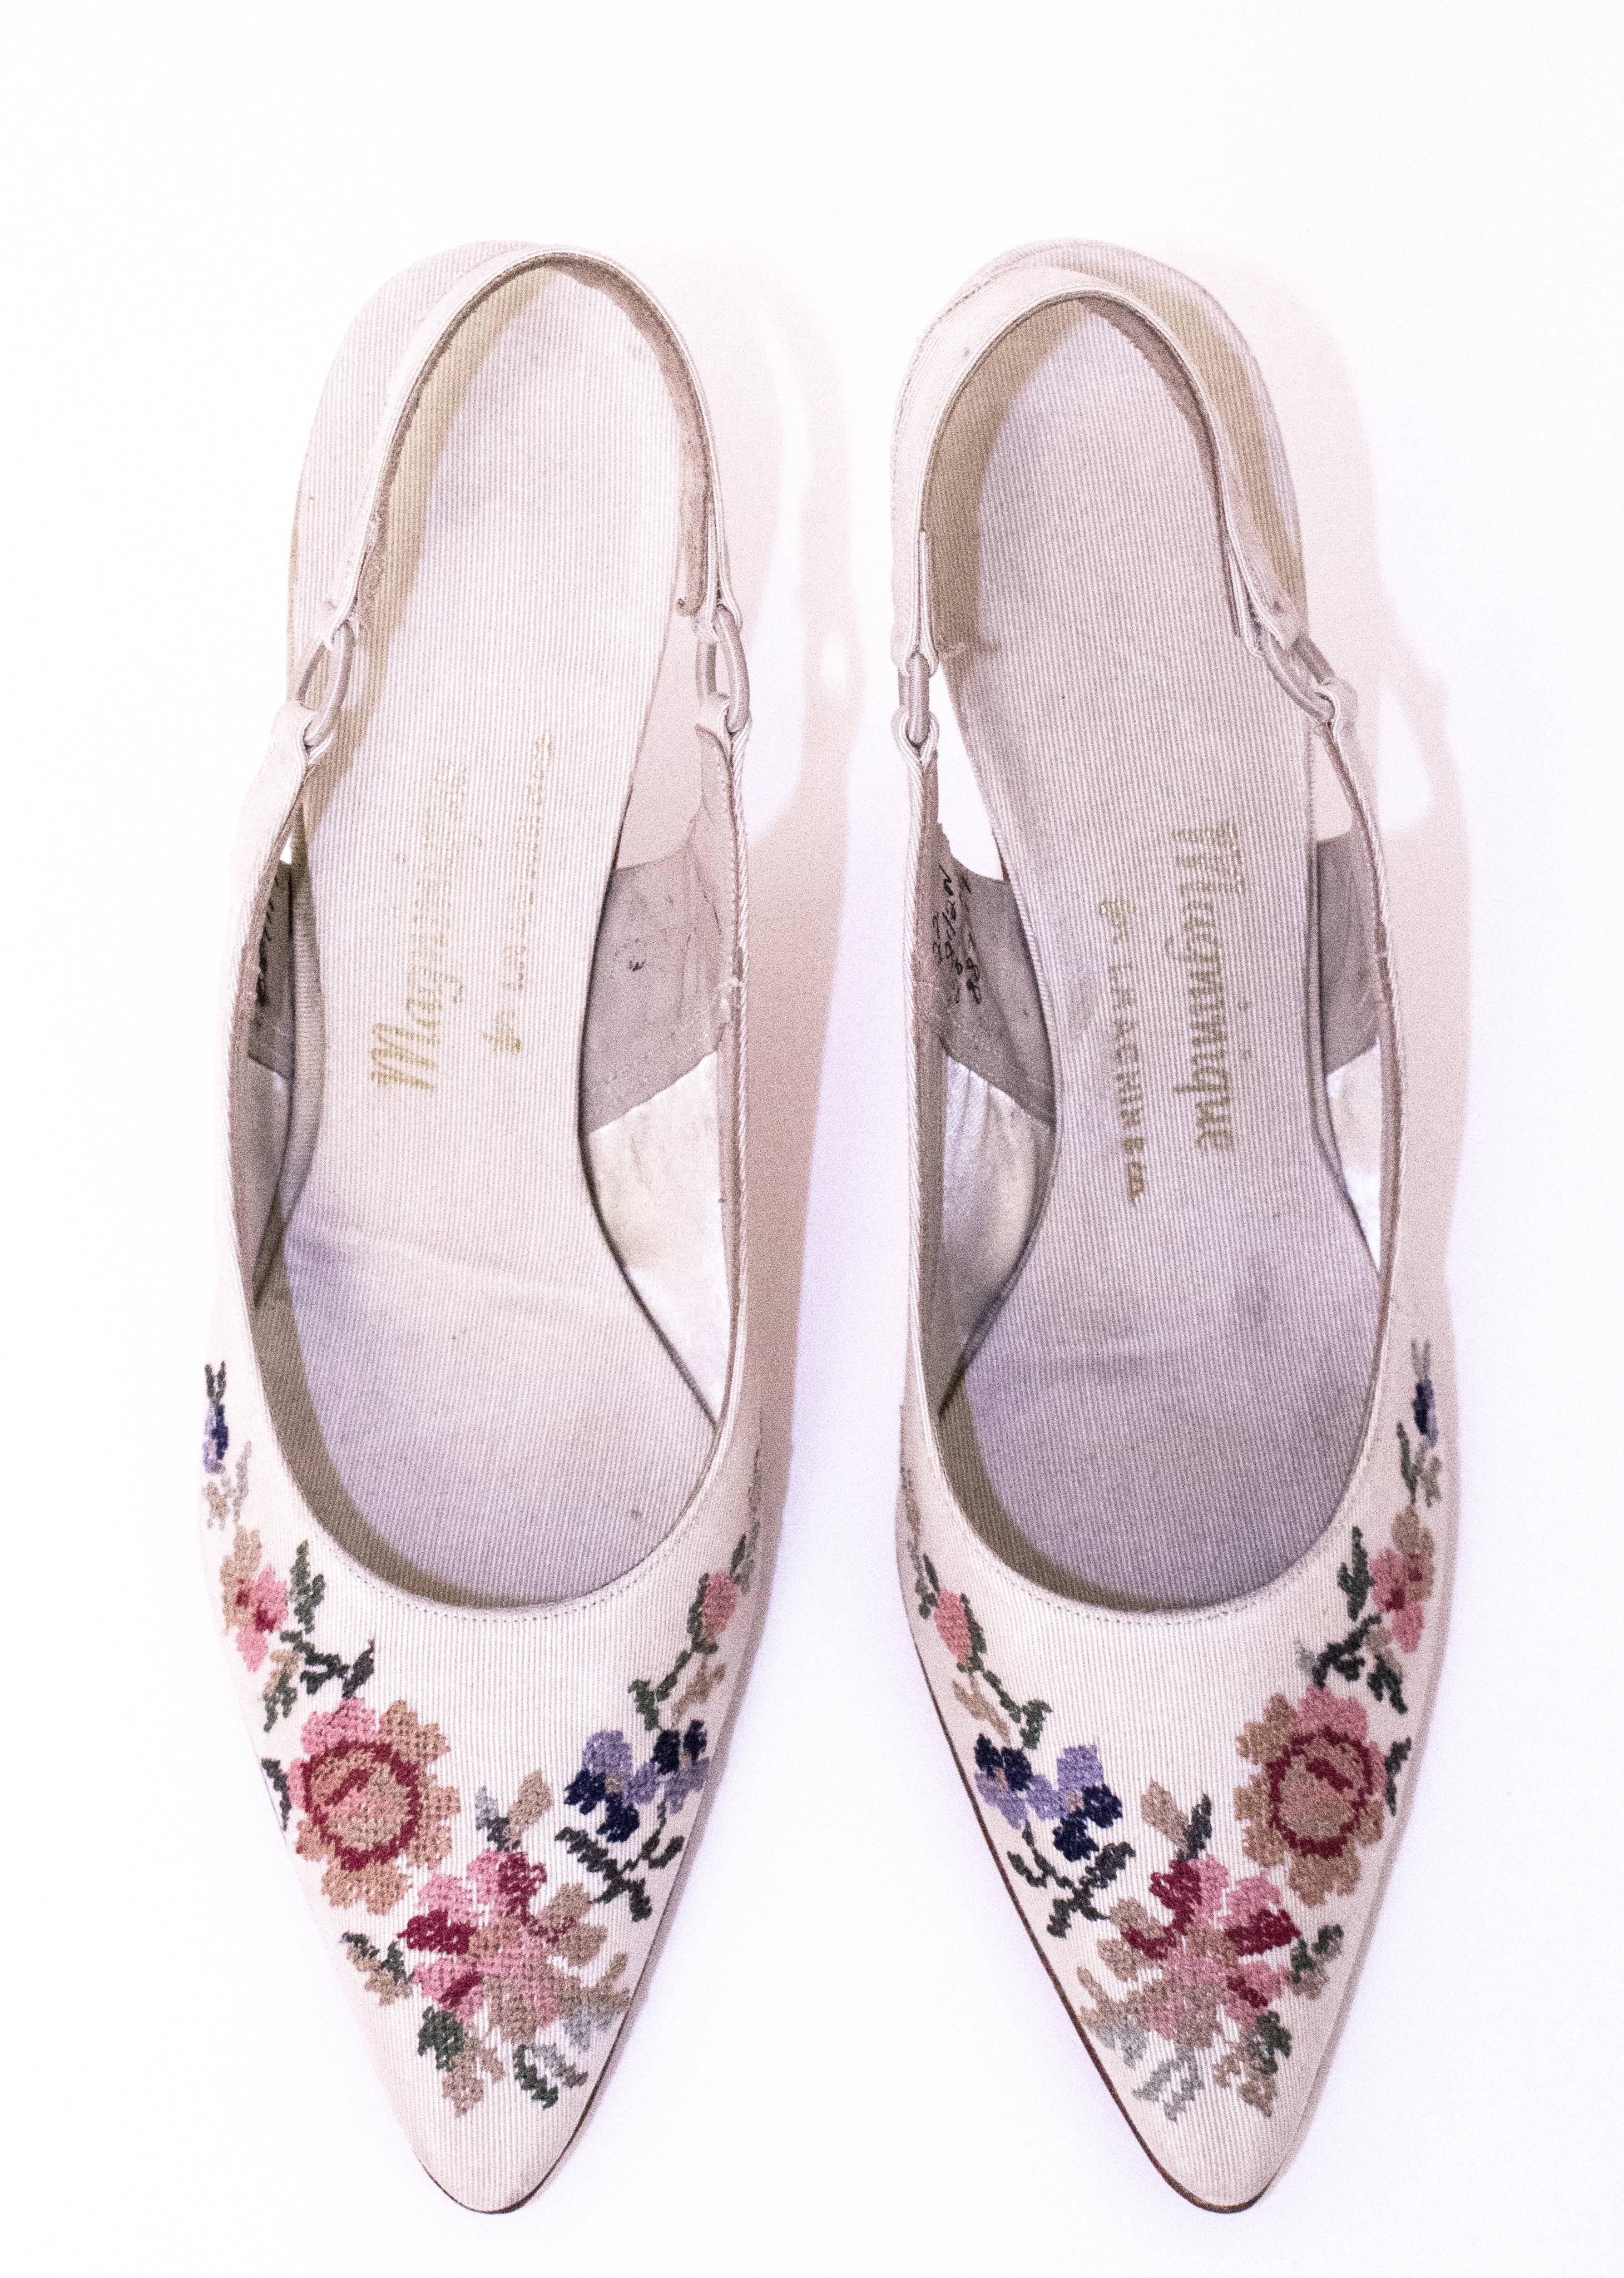 60s Cream Slingback Heels with Floral Needlepoint Embroidery. Leather soles. Headstock condition.  

Measurements:
Insole: 10 1/4